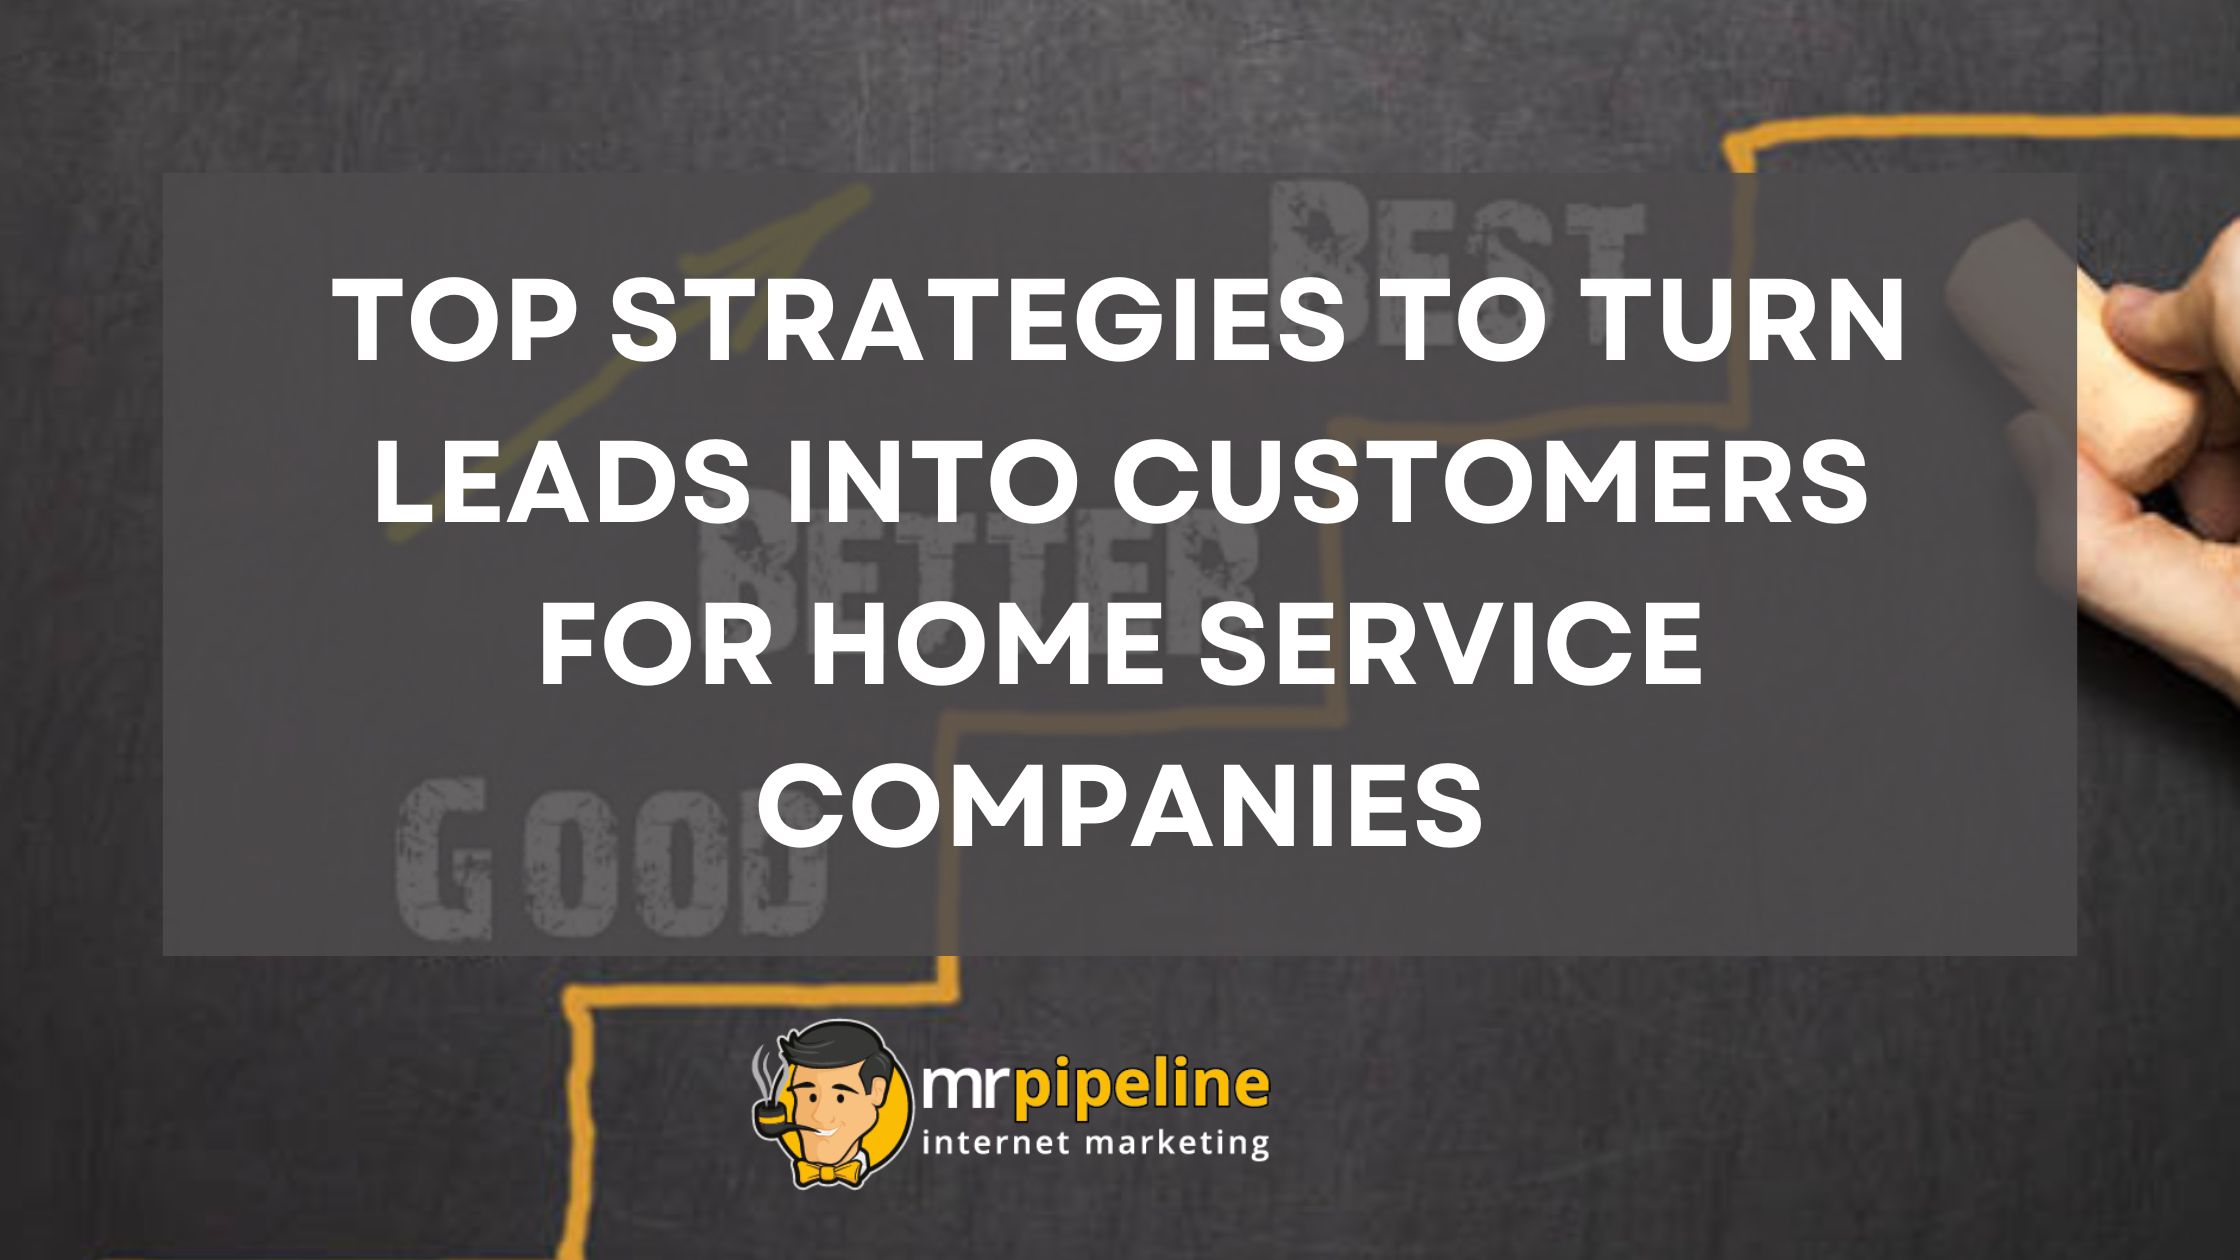 Top Strategies to Turn Leads into Customers for Home Service Companies